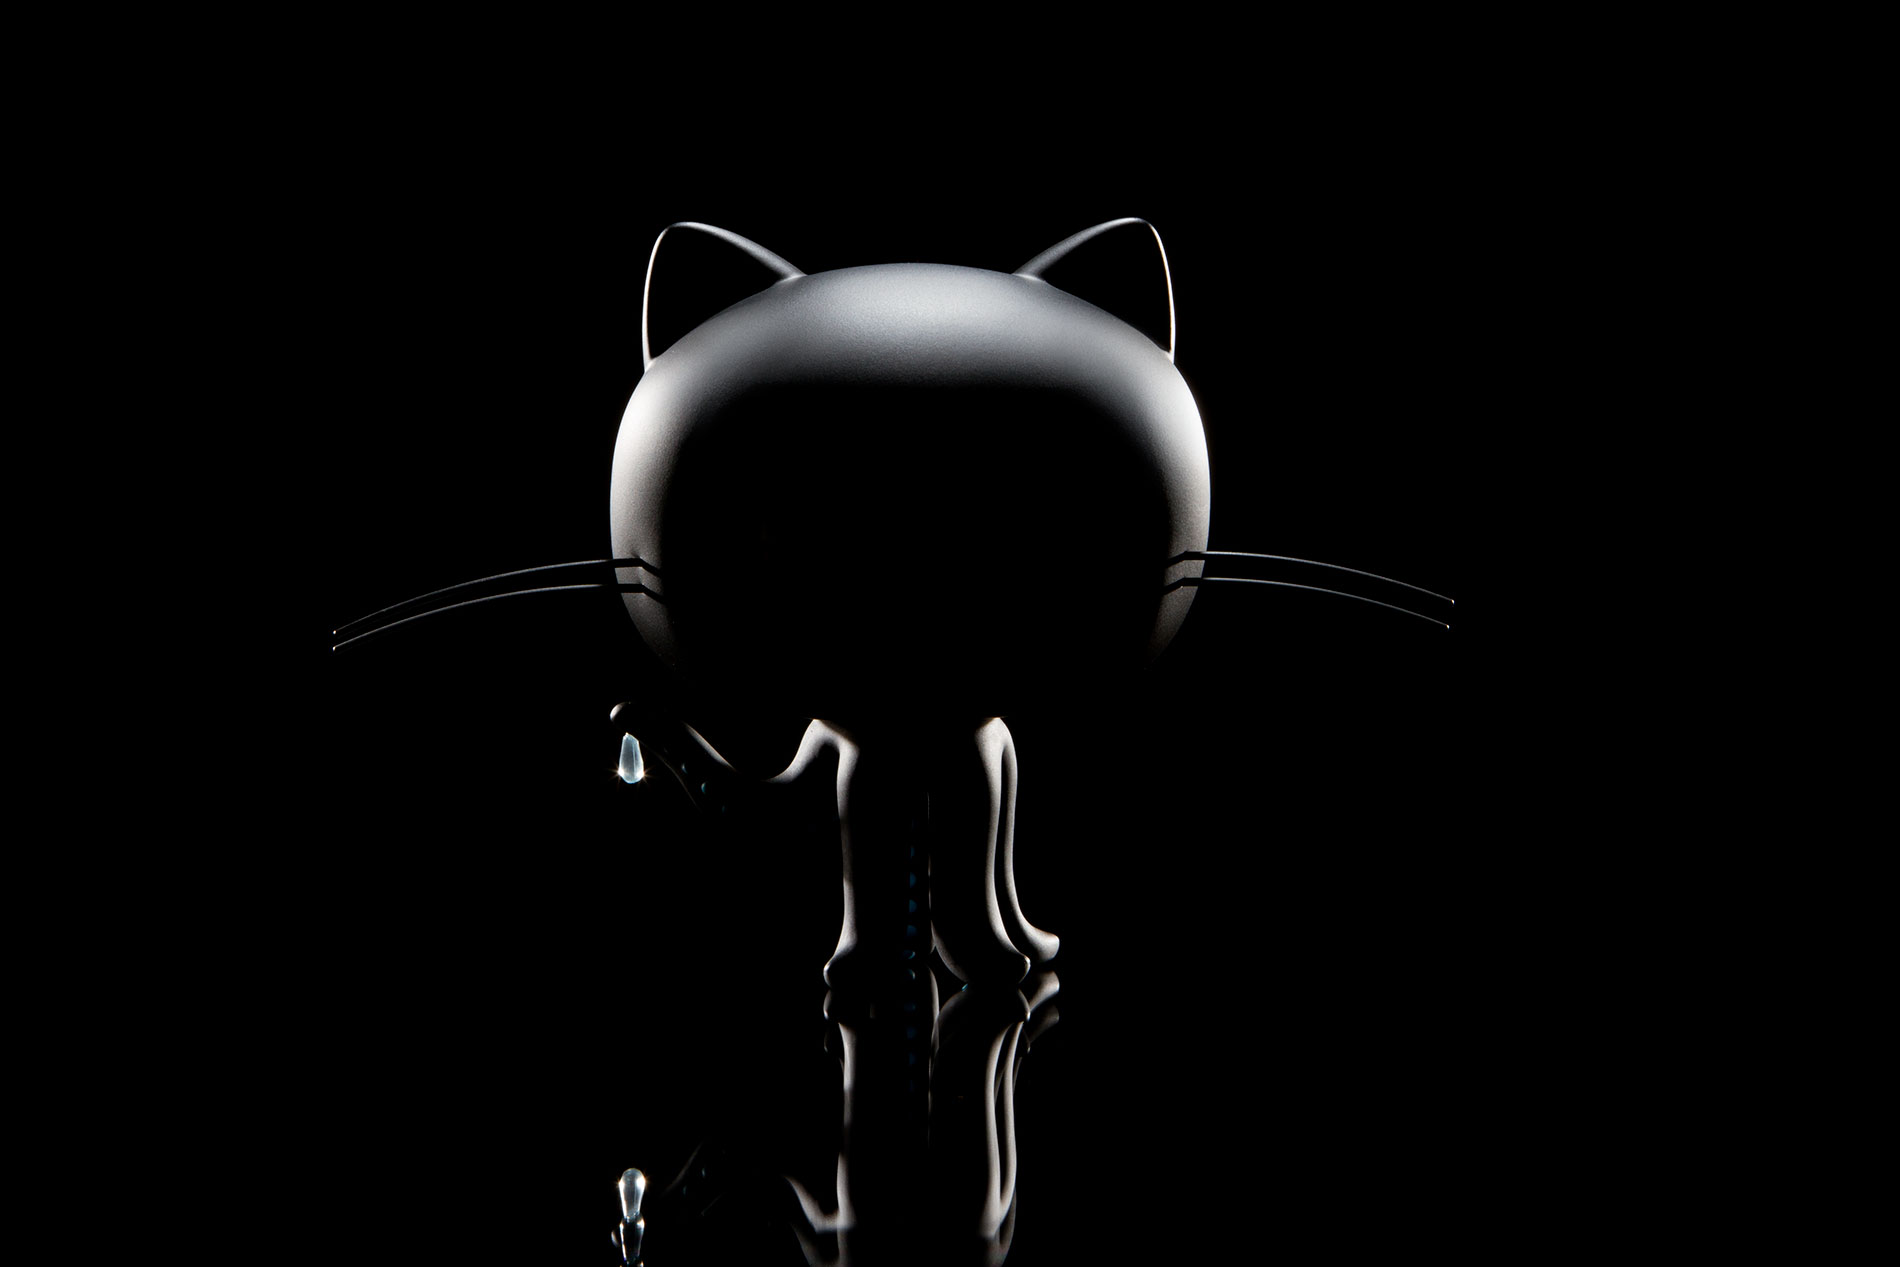 Dramatically back-lit silhouette image of the Octocat figurine